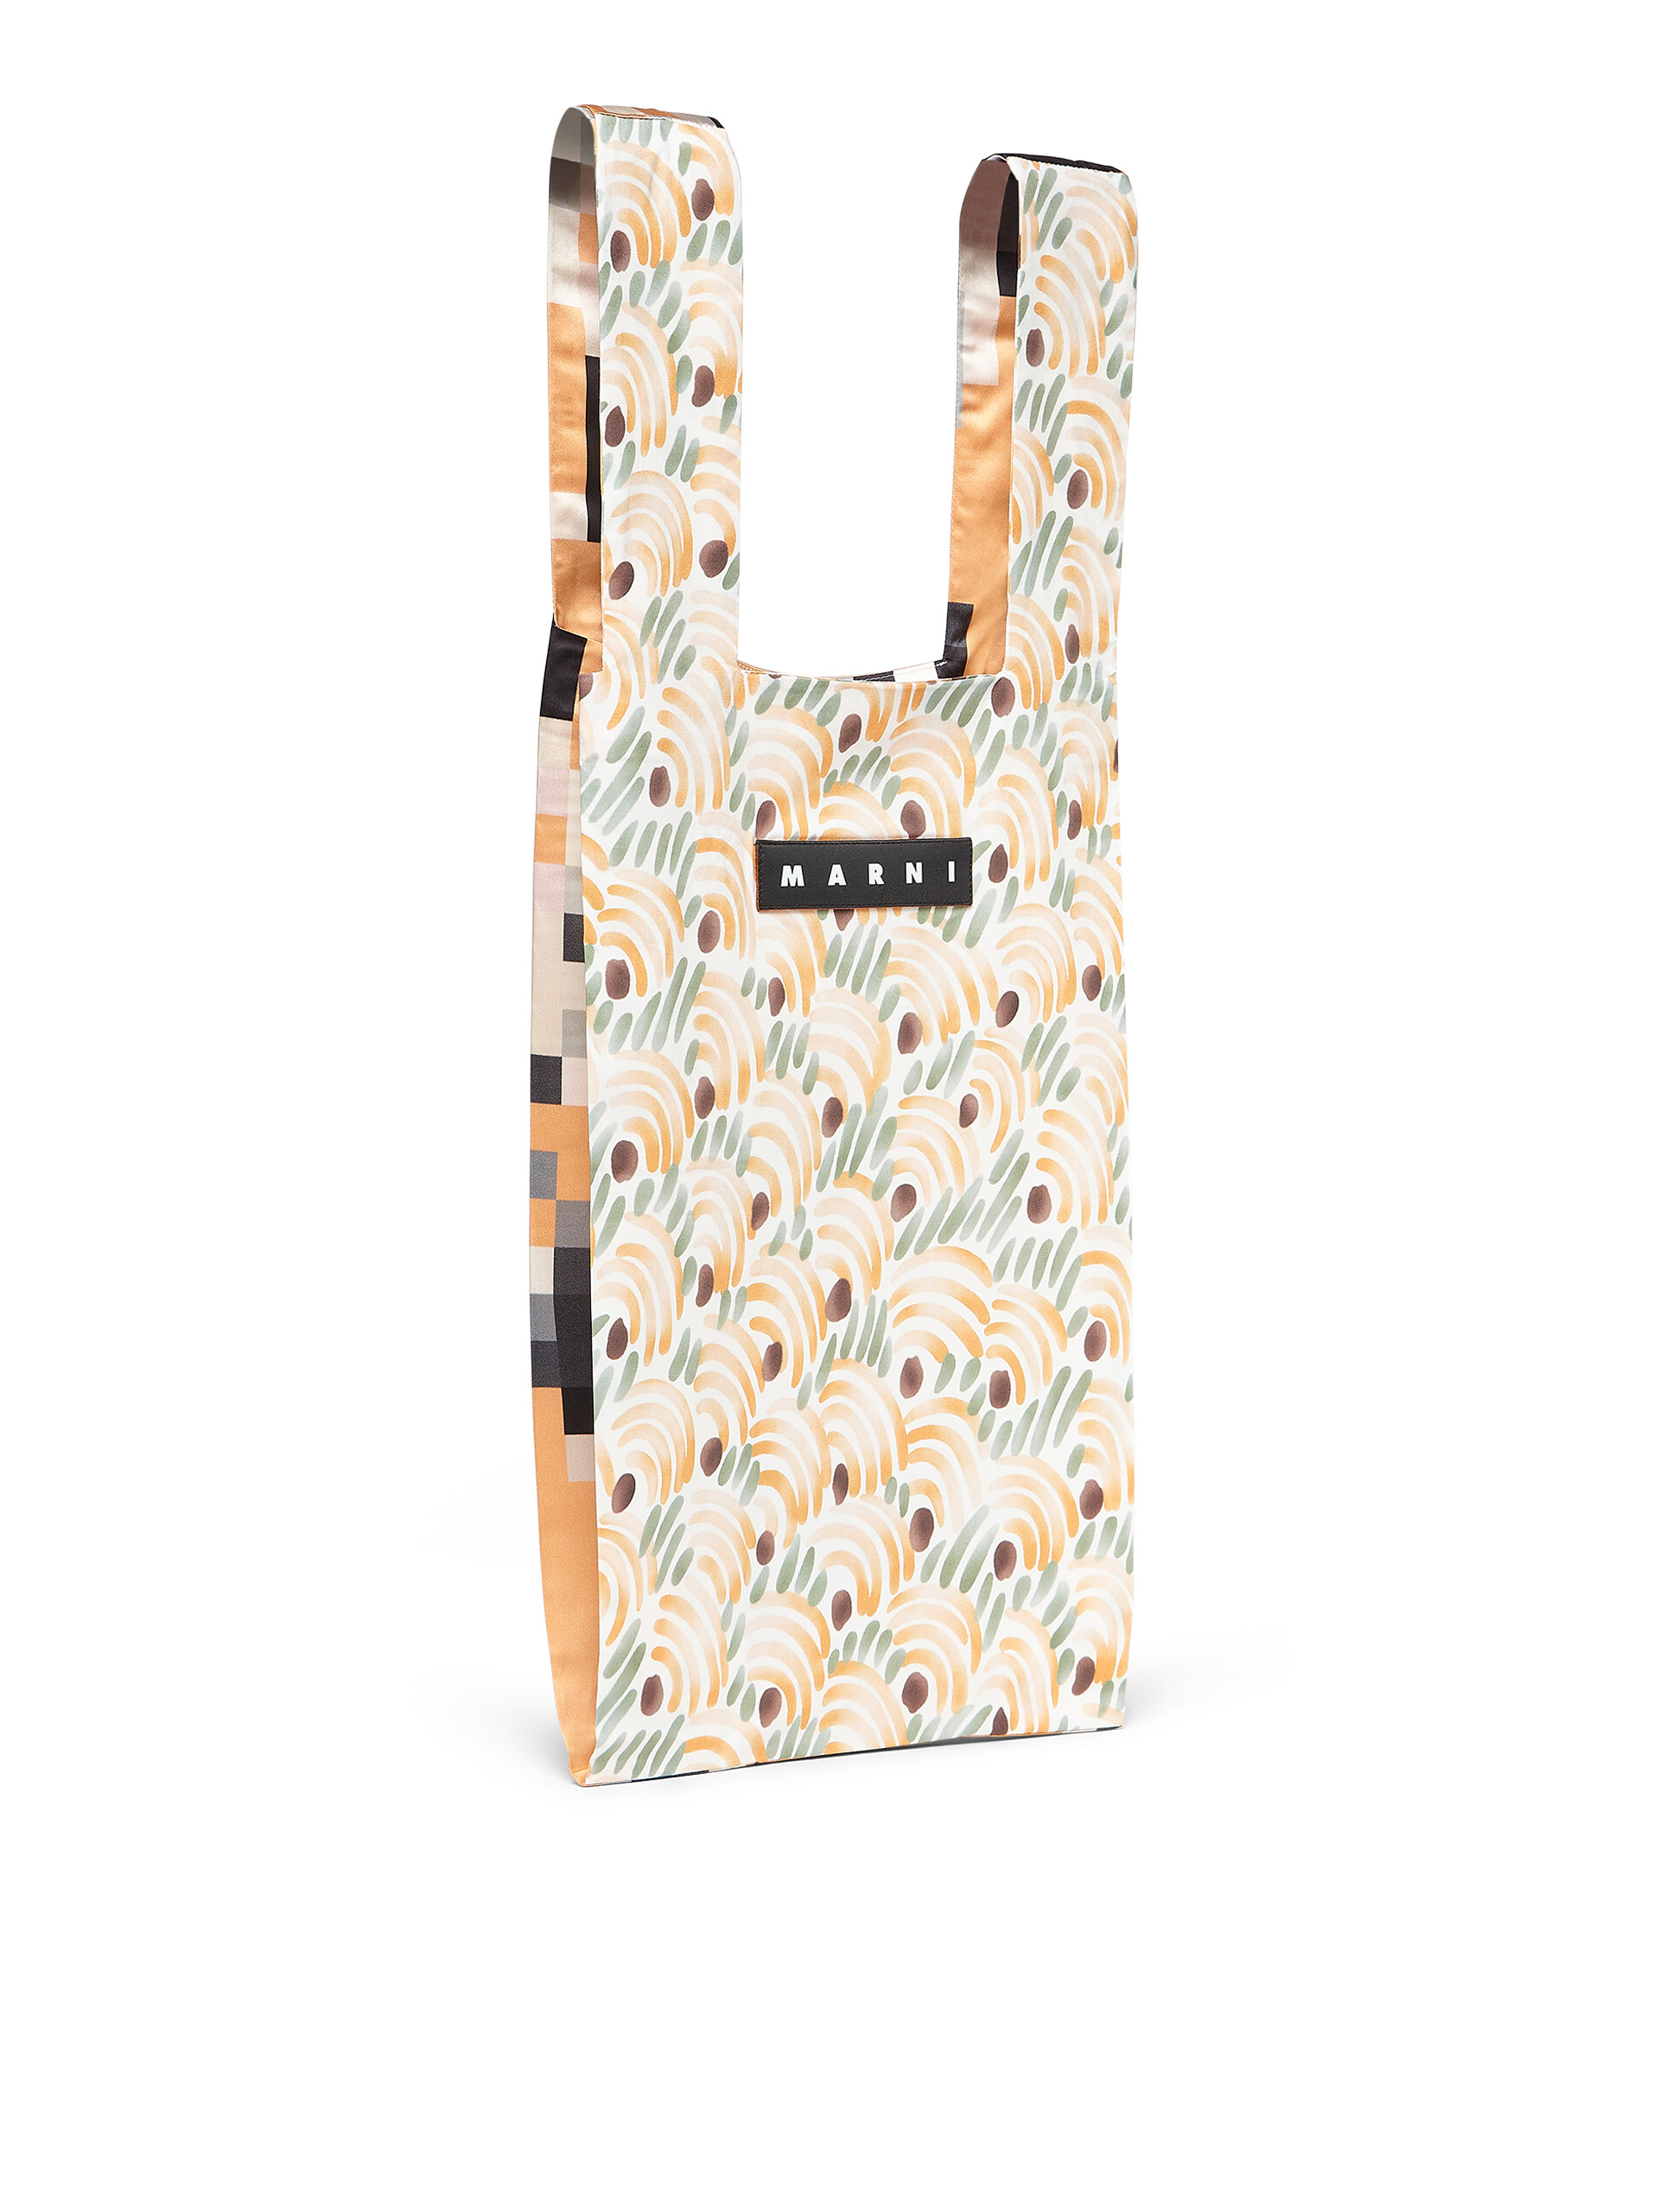 MARNI MARKET cotton shopping bag with abstract and pixel print - Bags - Image 2